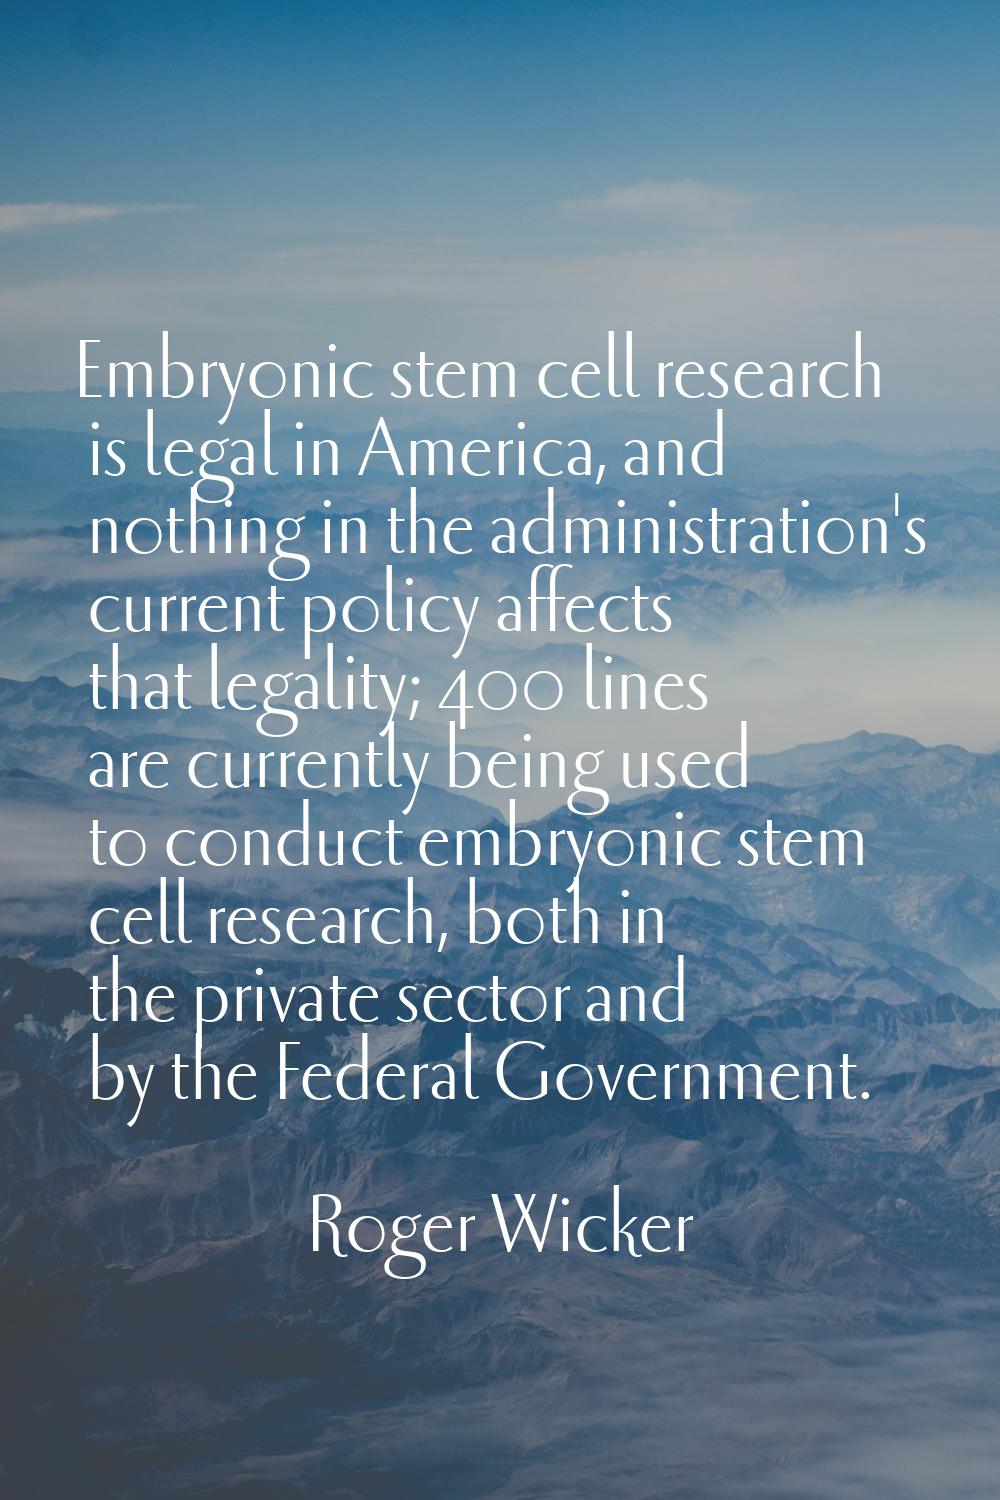 Embryonic stem cell research is legal in America, and nothing in the administration's current polic